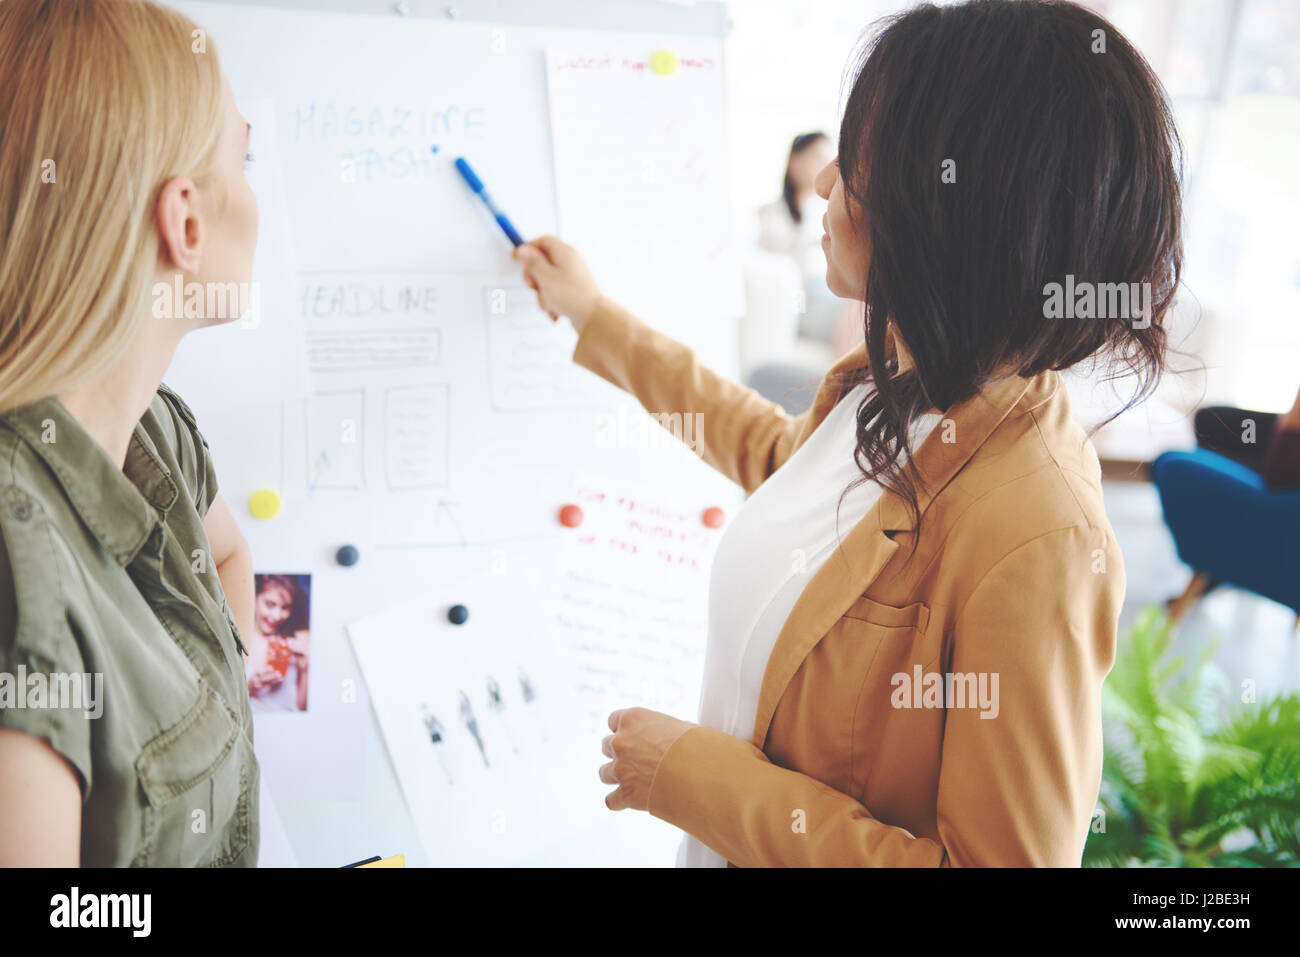 Business woman discussing project with colleague Stock Photo